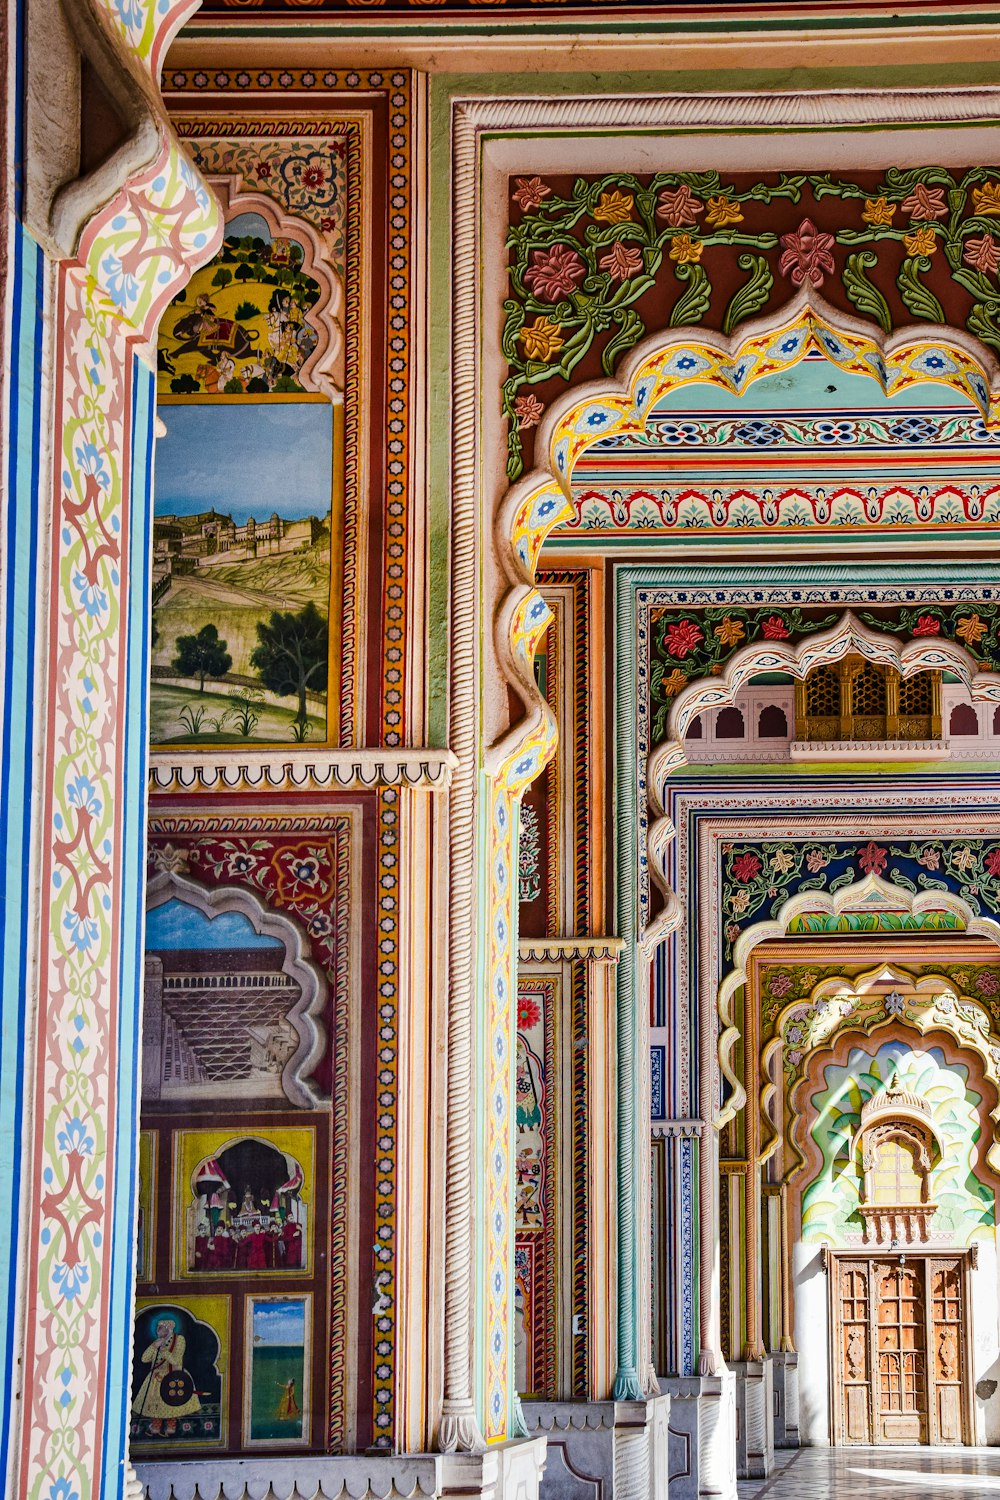 a colorfully painted building with columns and arches